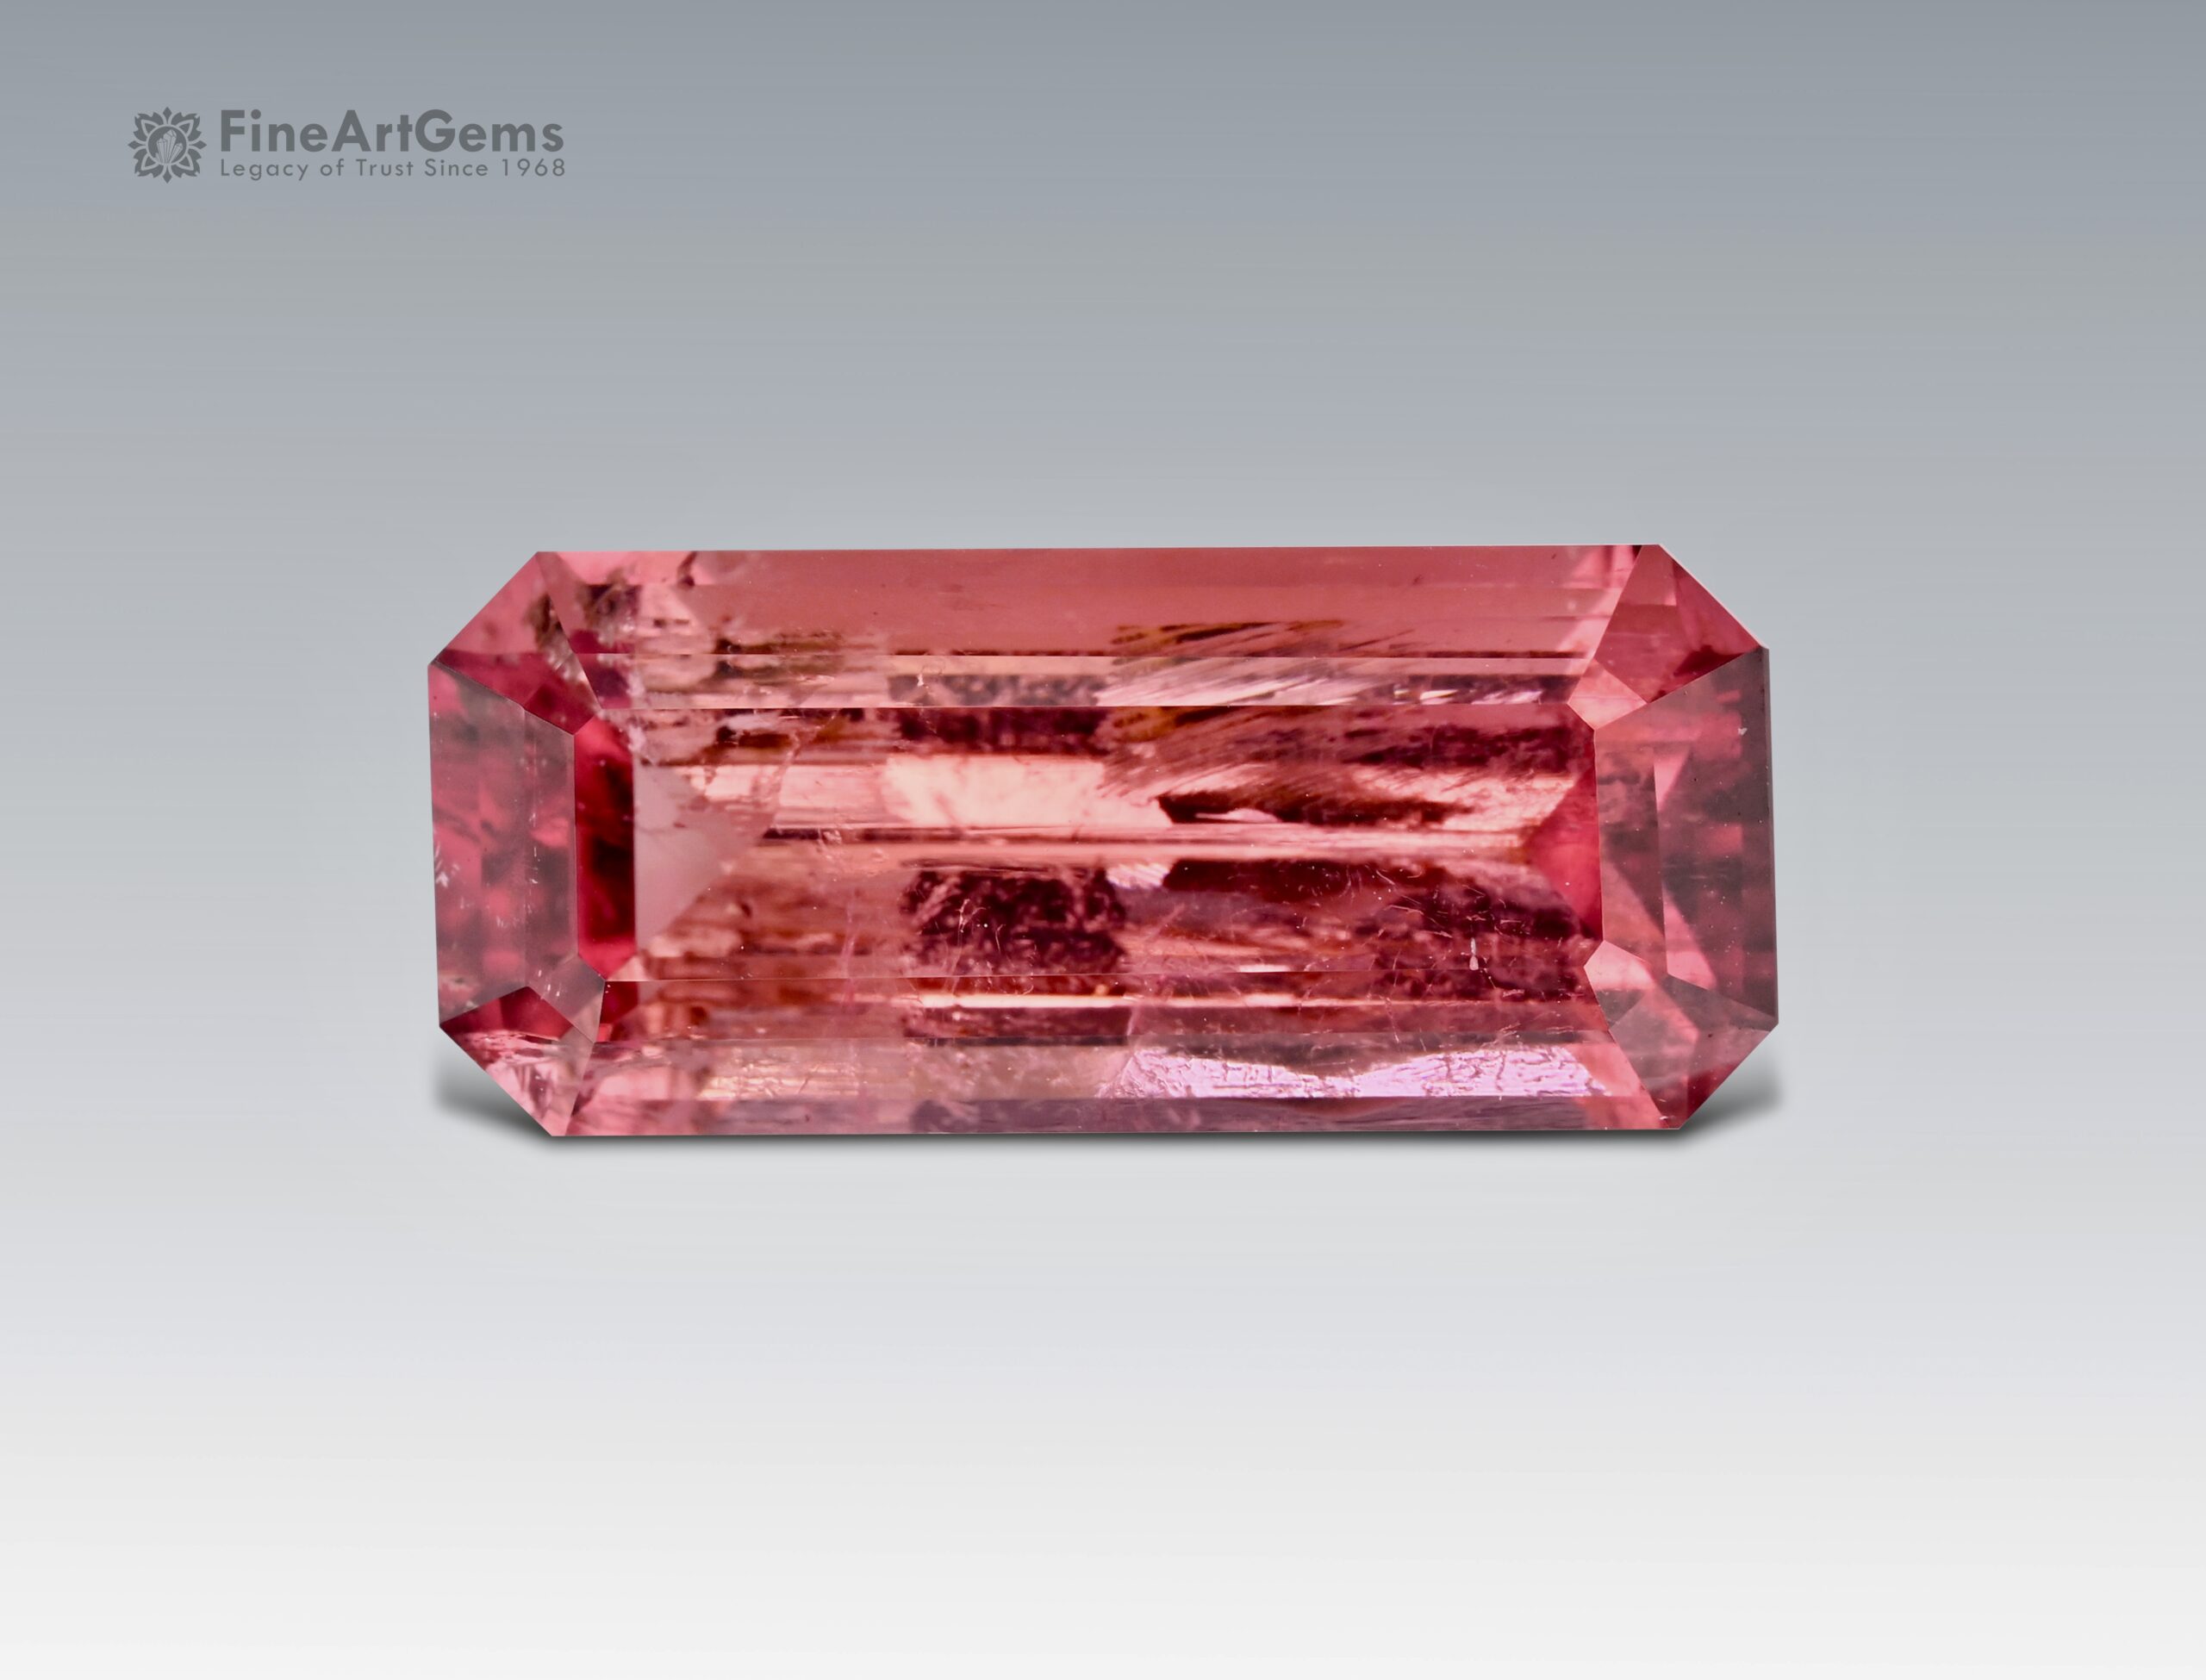 4.5 Carats Hot Pink Tourmaline Gemstone from Afghanistan